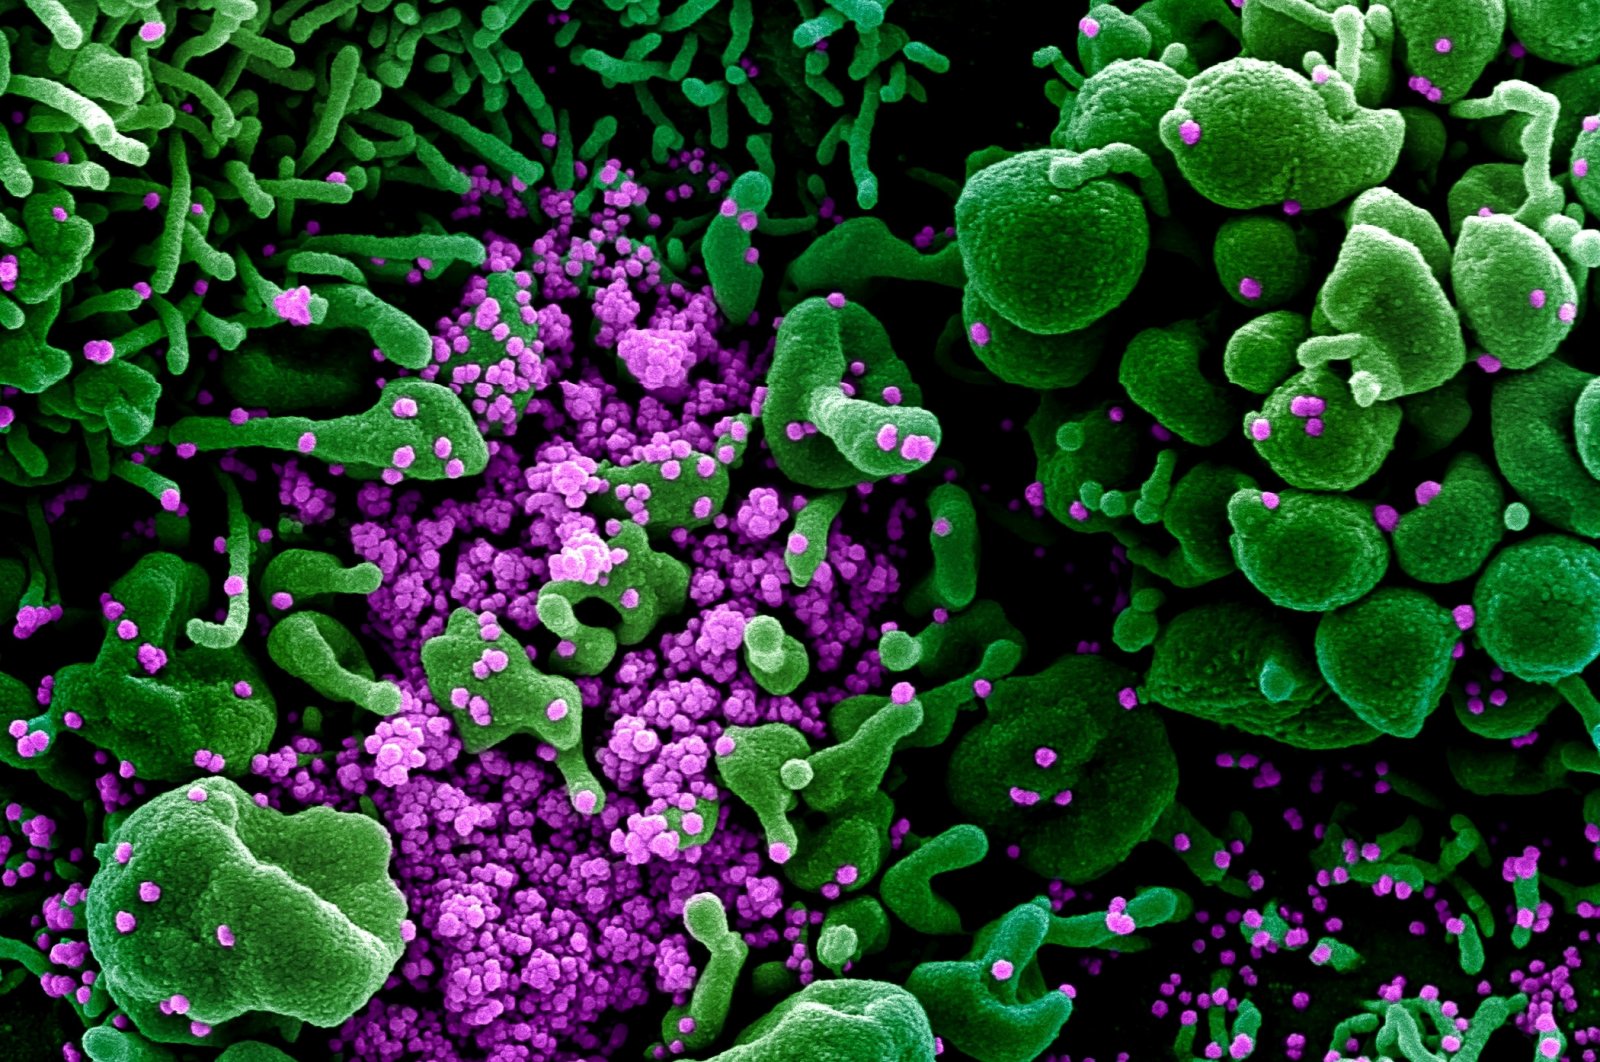 Colorized scanning electron micrograph of an apoptotic cell (green) heavily infected with SARS-COV-2 virus particles (purple), isolated from a patient sample. (NIAID Integrated Research Facility (IRF)/Handout via REUTERS)